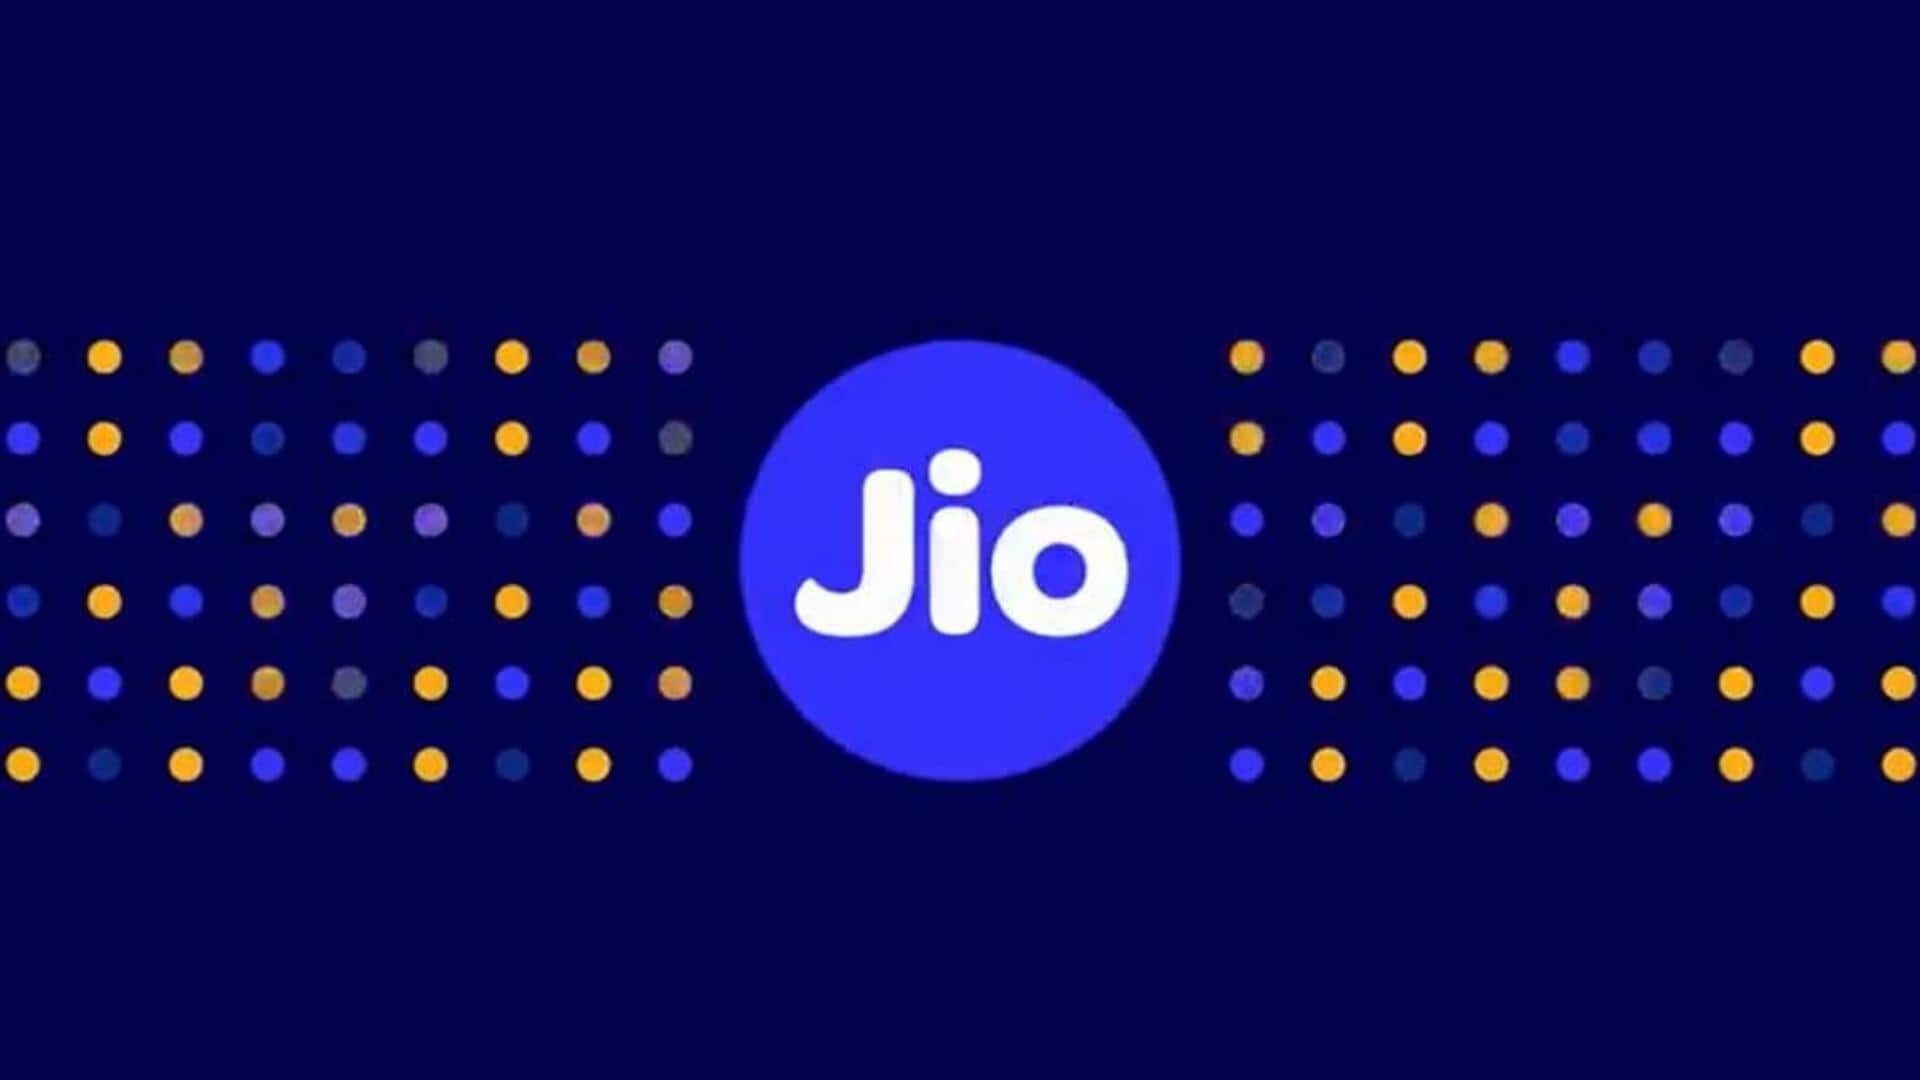 Jio announces special offers on prepaid plans for 7th anniversary